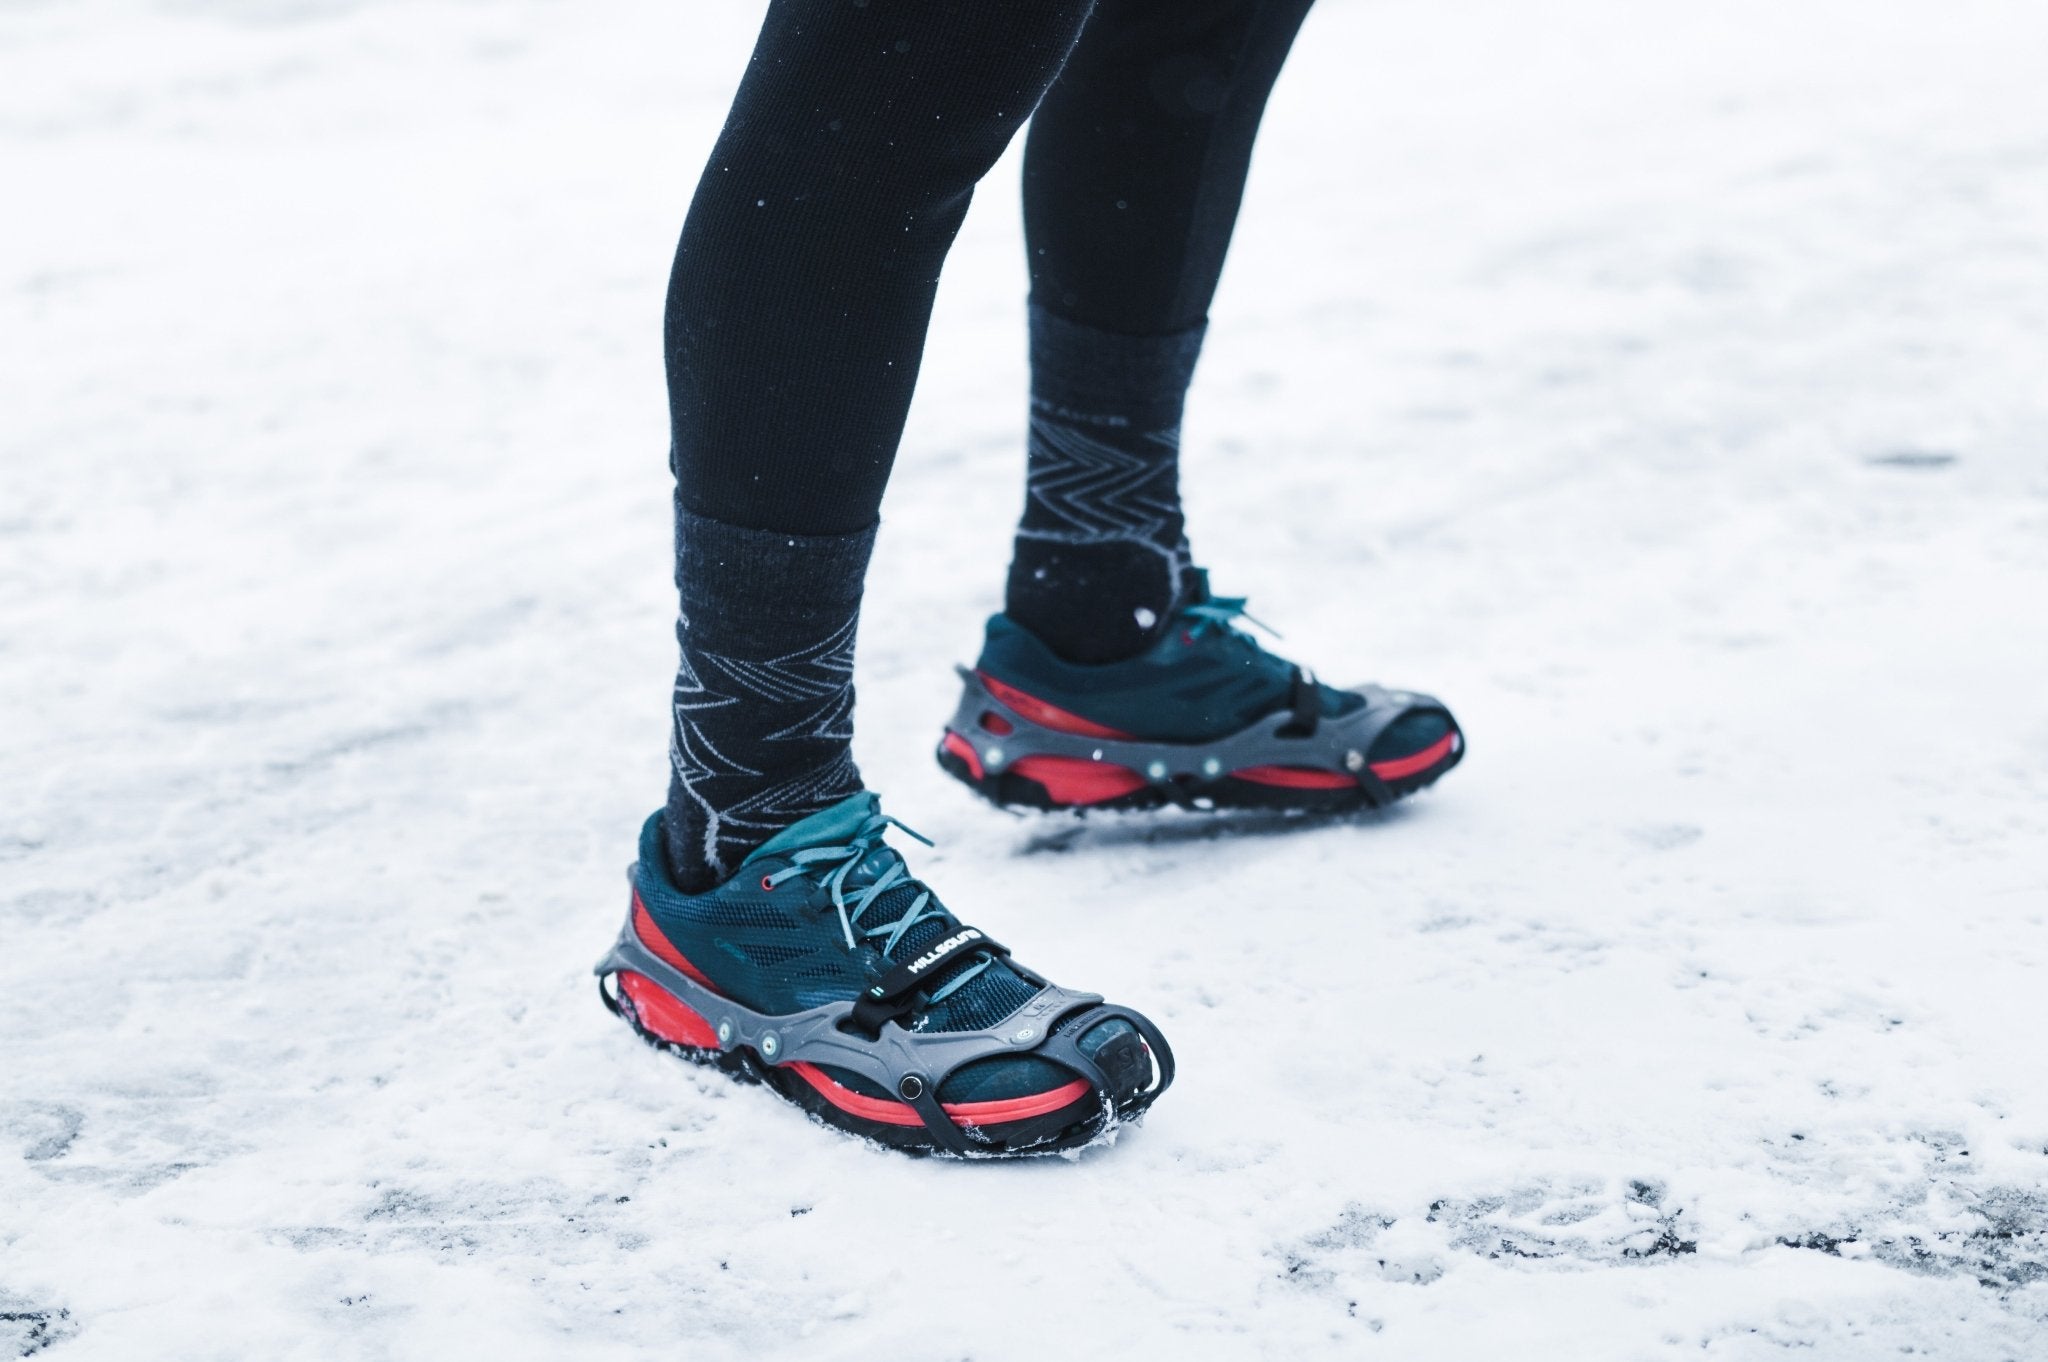 Spikes, Crampons, Traction Devices, What's the Difference? – [USA ...